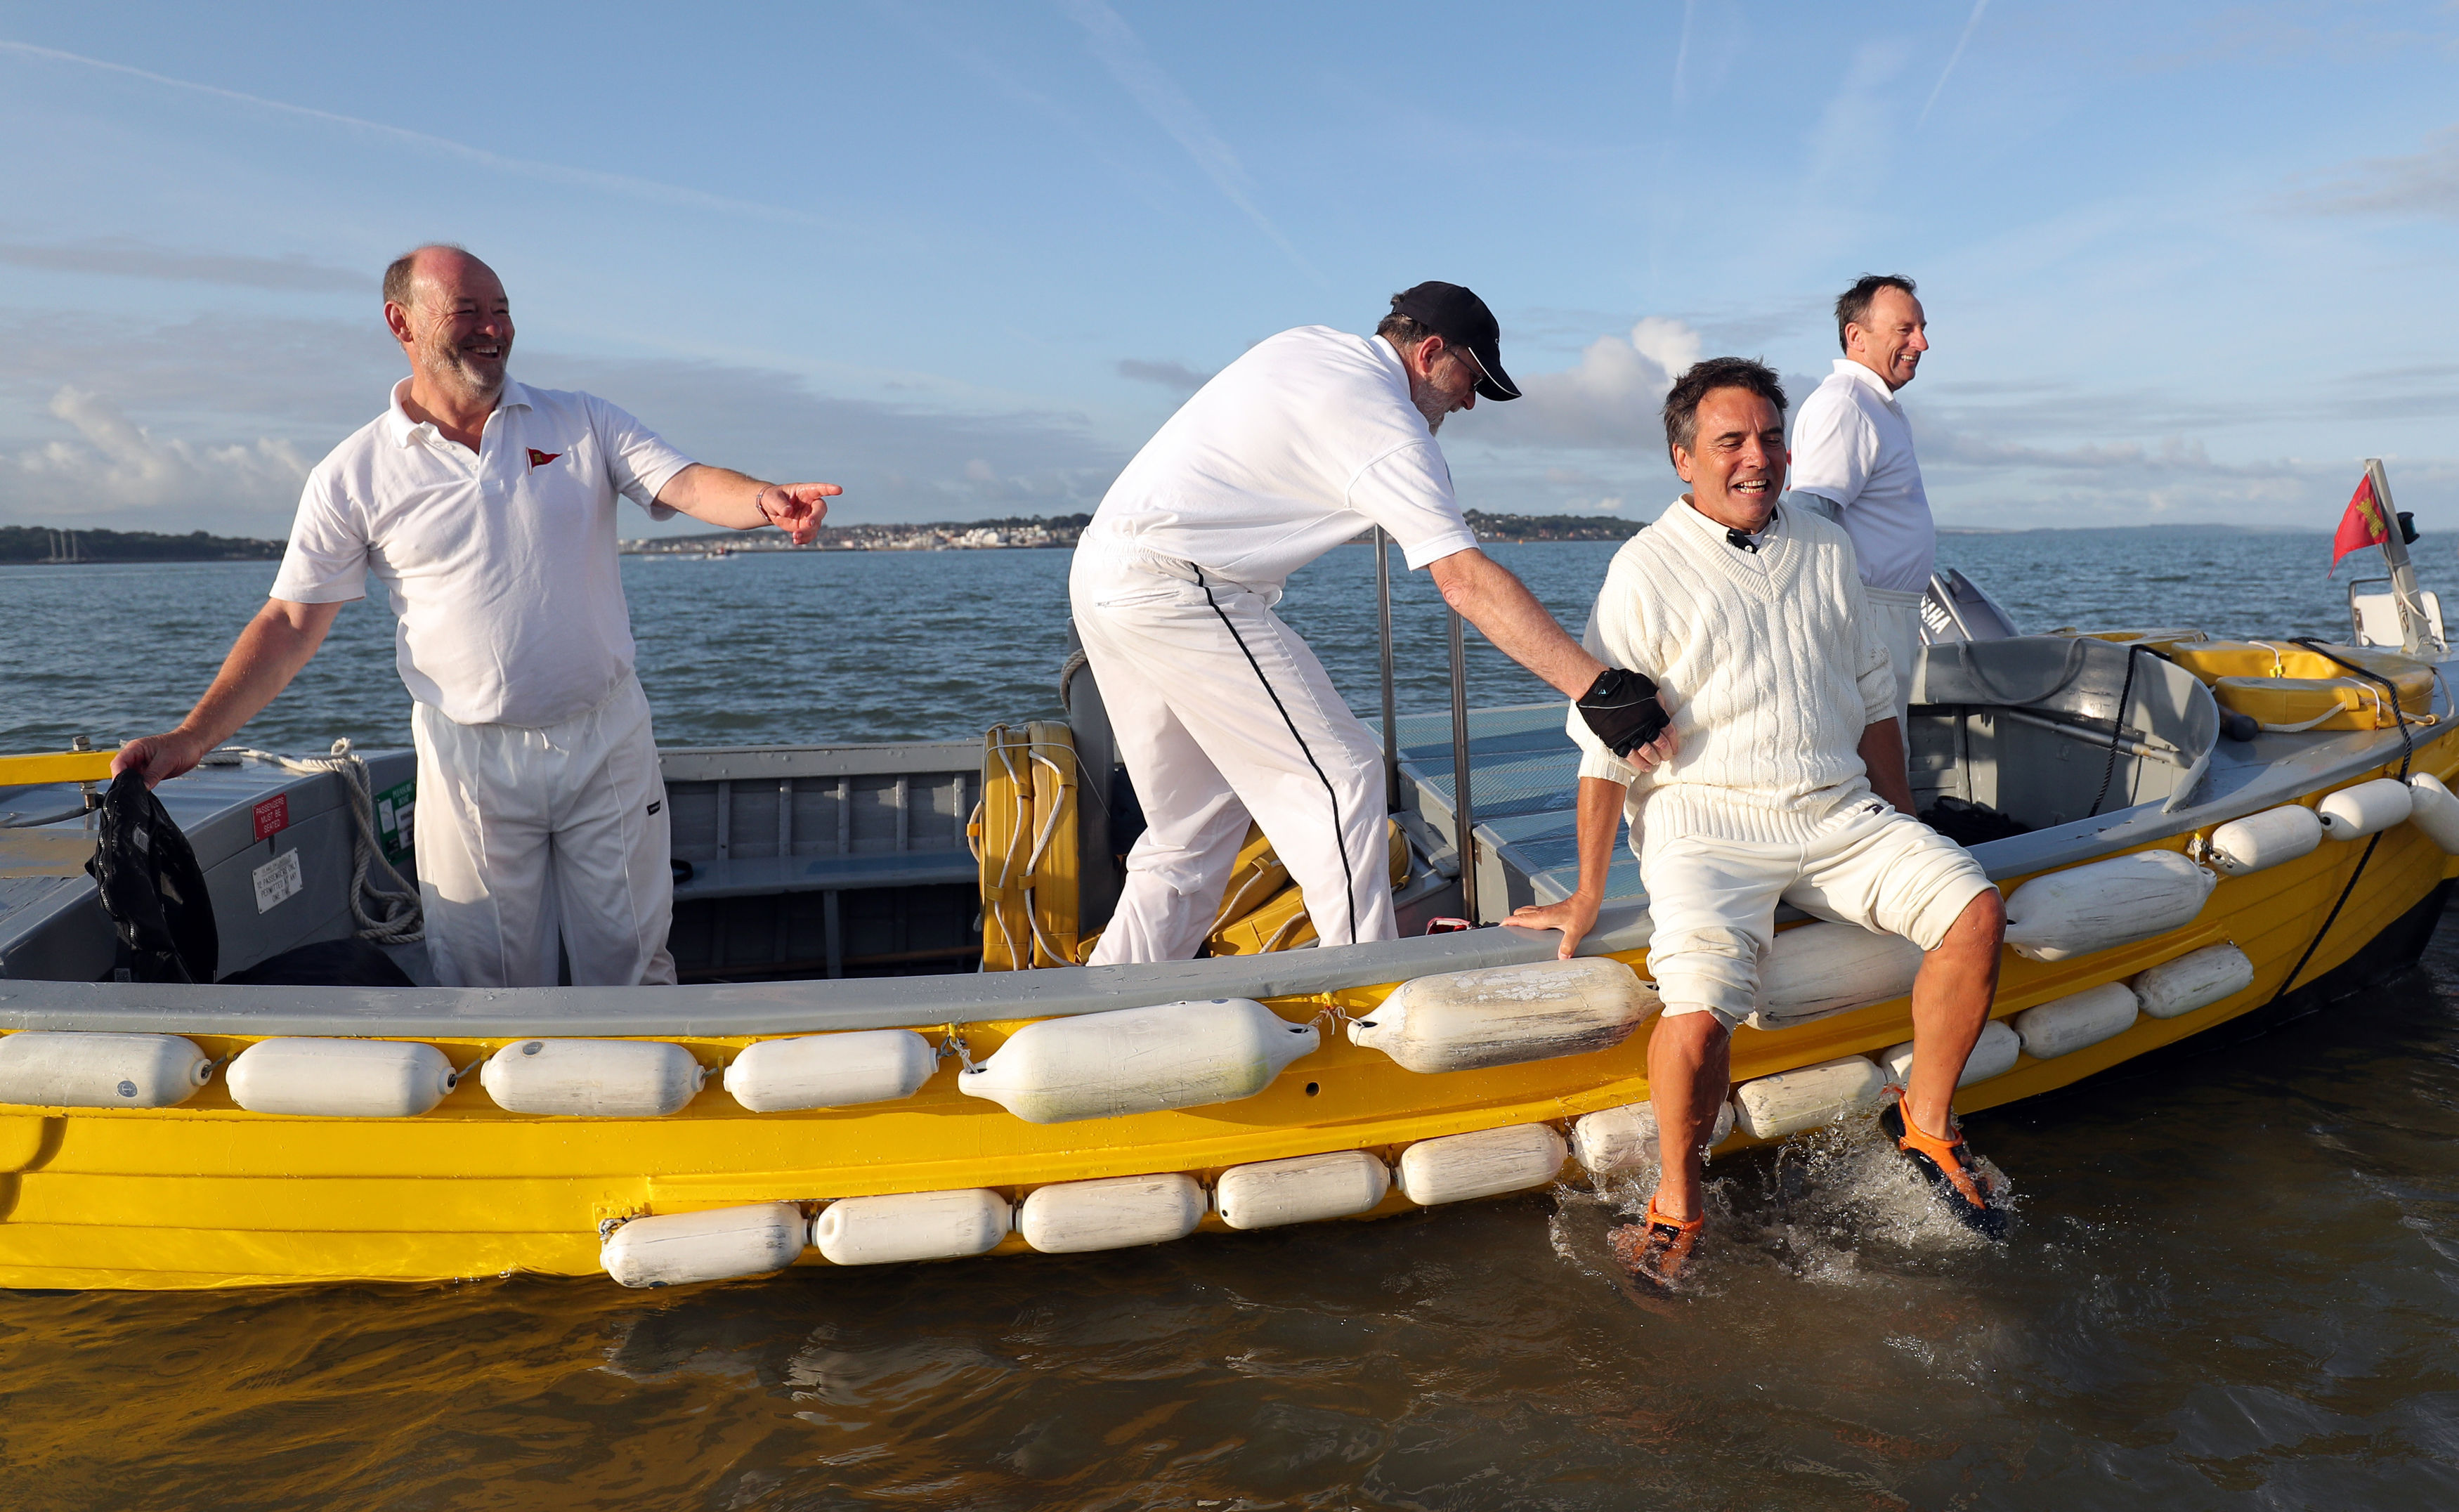 Cricket players on a boat after the annual Brambles cricket match